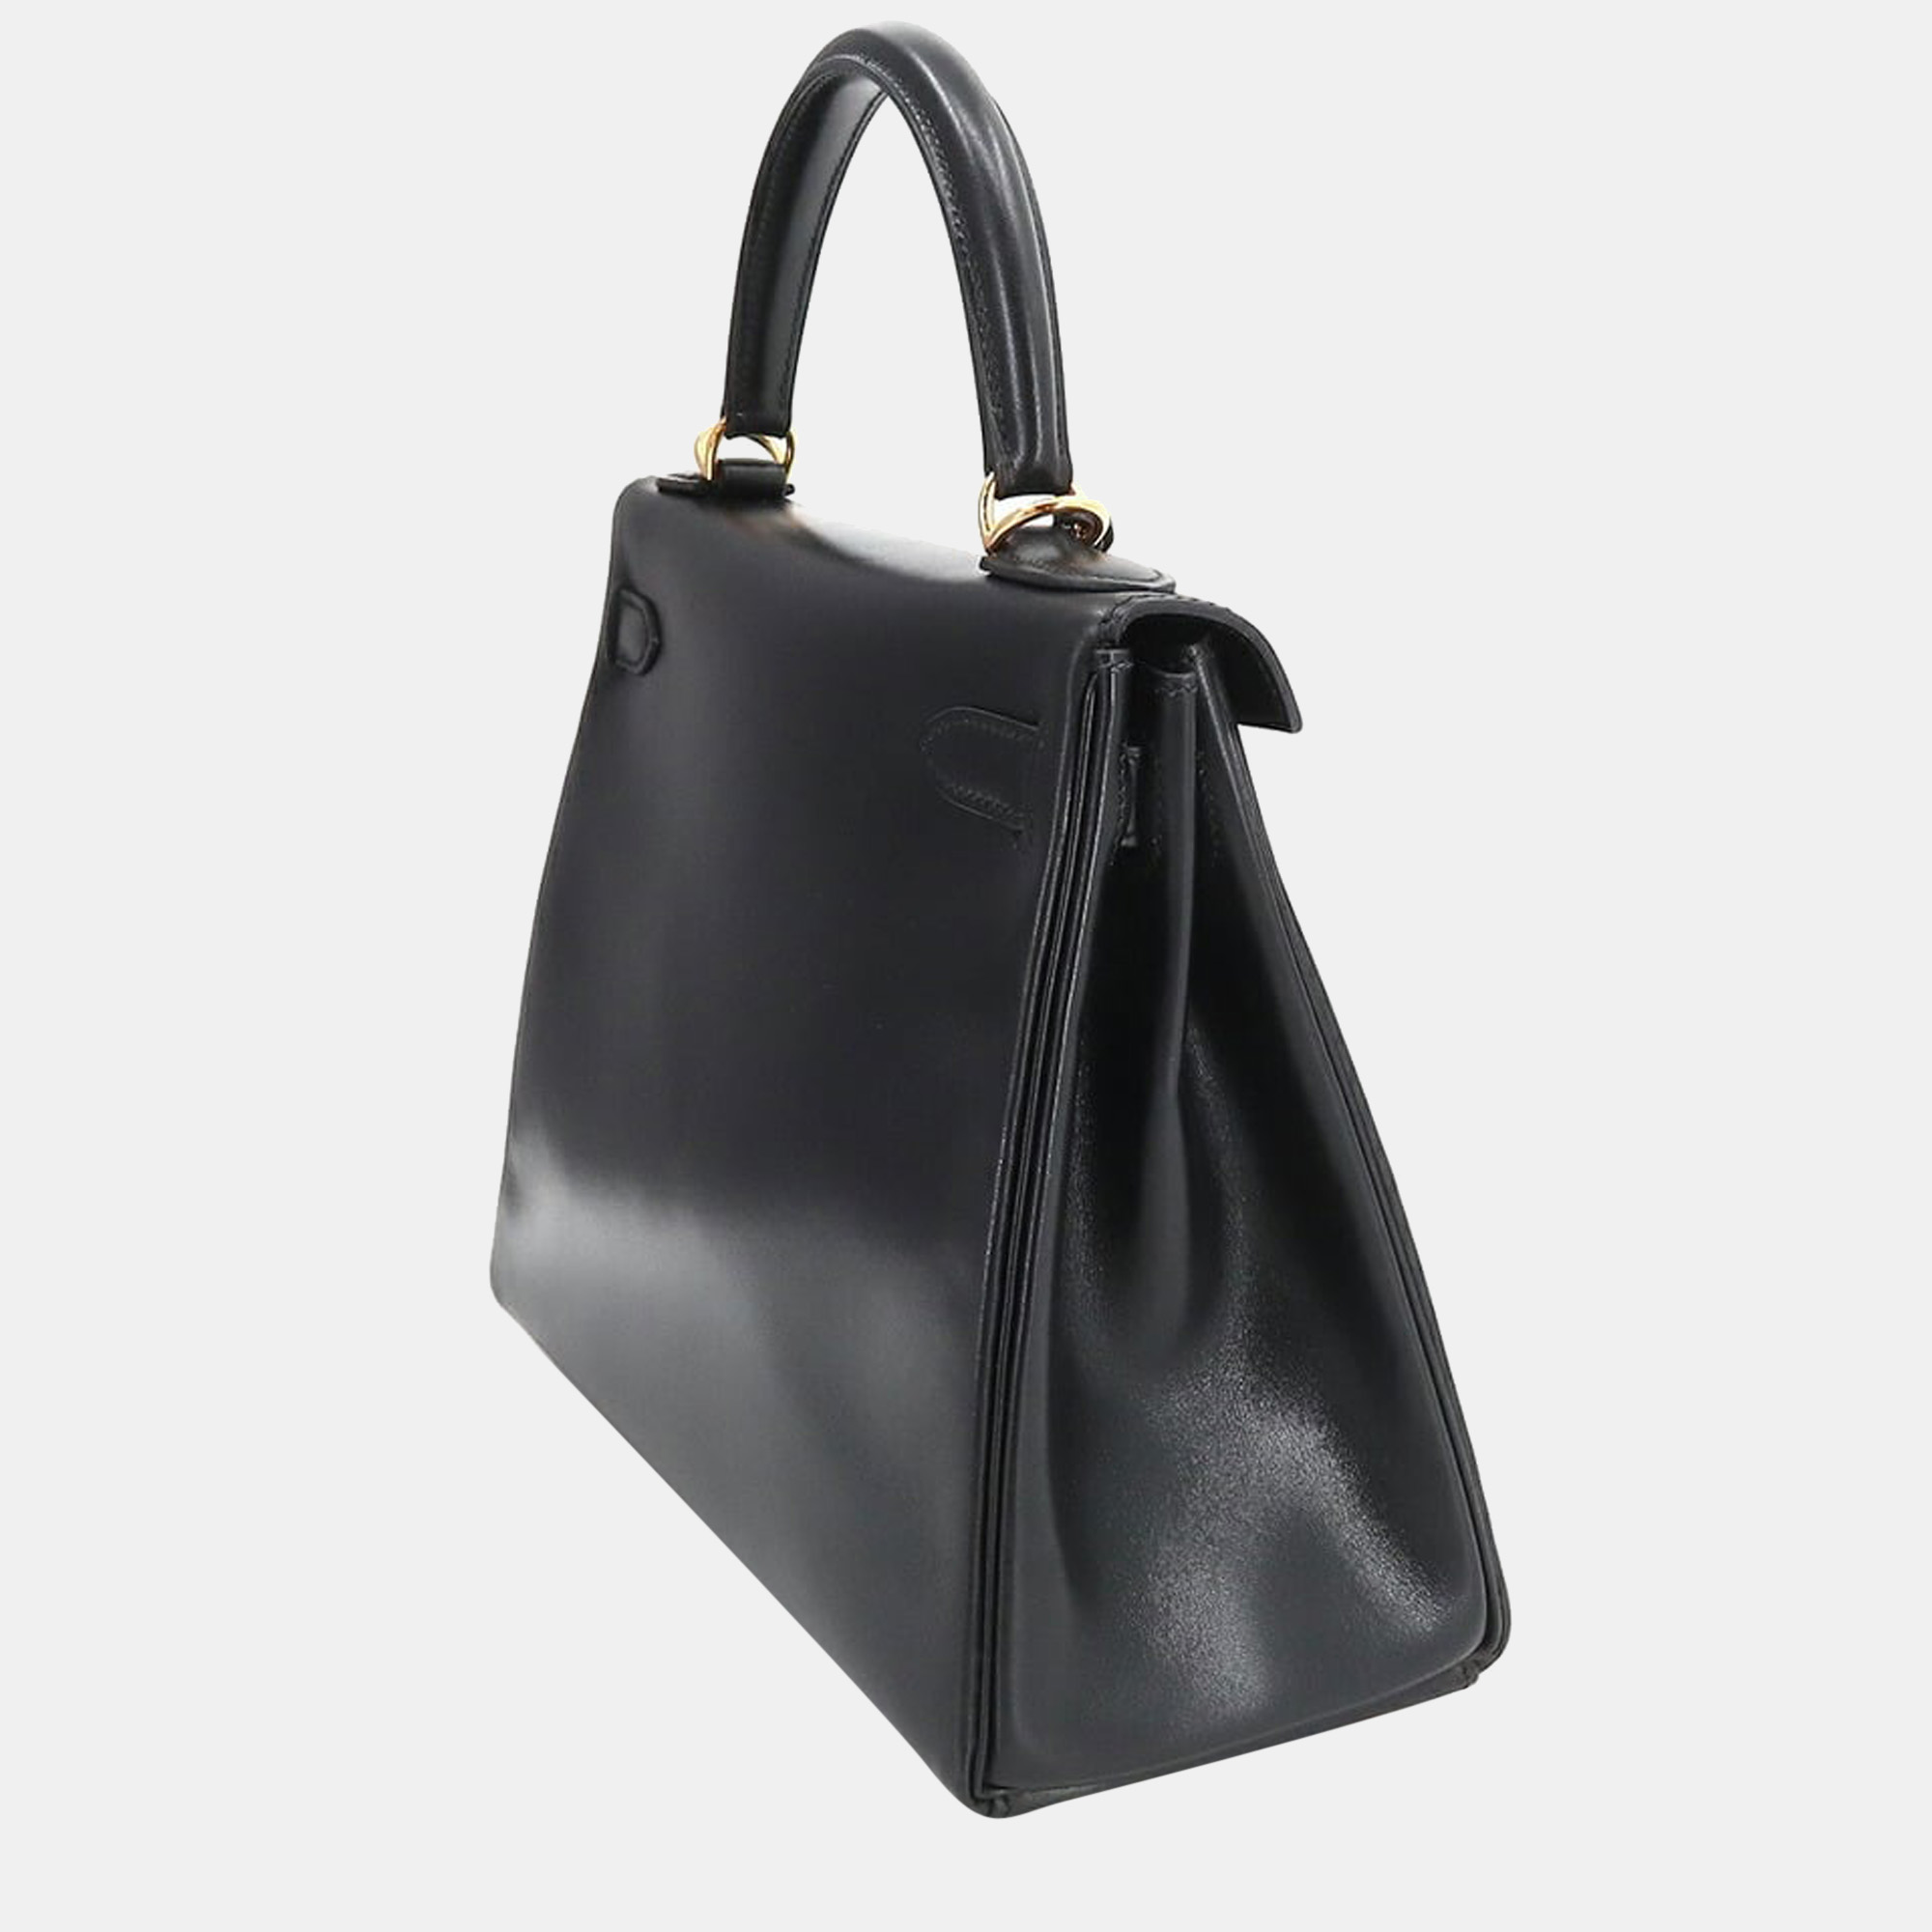 

Hermes Kelly 28 2way hand shoulder bag box calf leather black ¡ E stamped inner stitch gold metal fittings